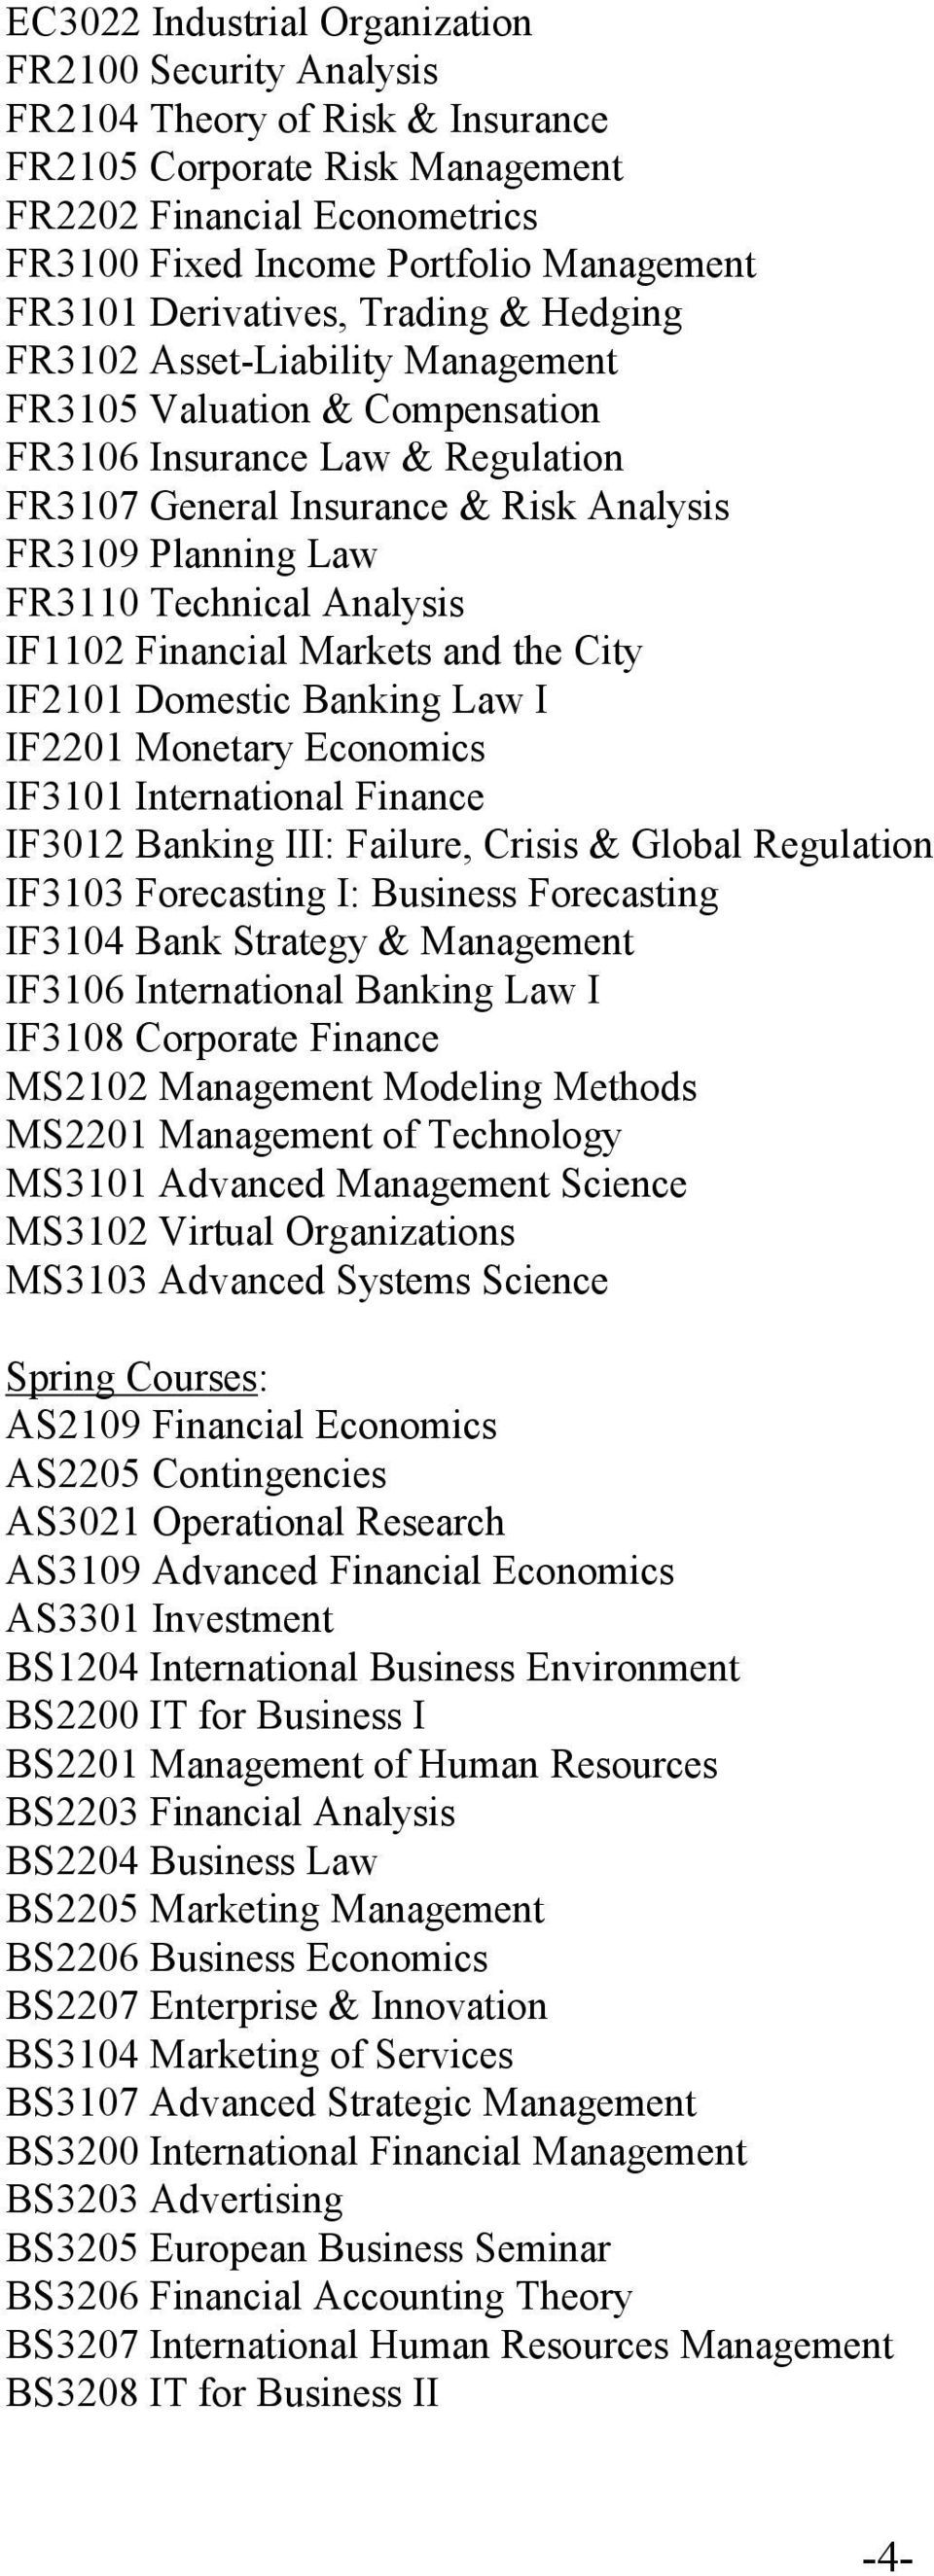 FR3110 Technical Analysis IF1102 Financial Markets and the City IF2101 Domestic Banking Law I IF2201 Monetary Economics IF3101 International Finance IF3012 Banking III: Failure, Crisis & Global